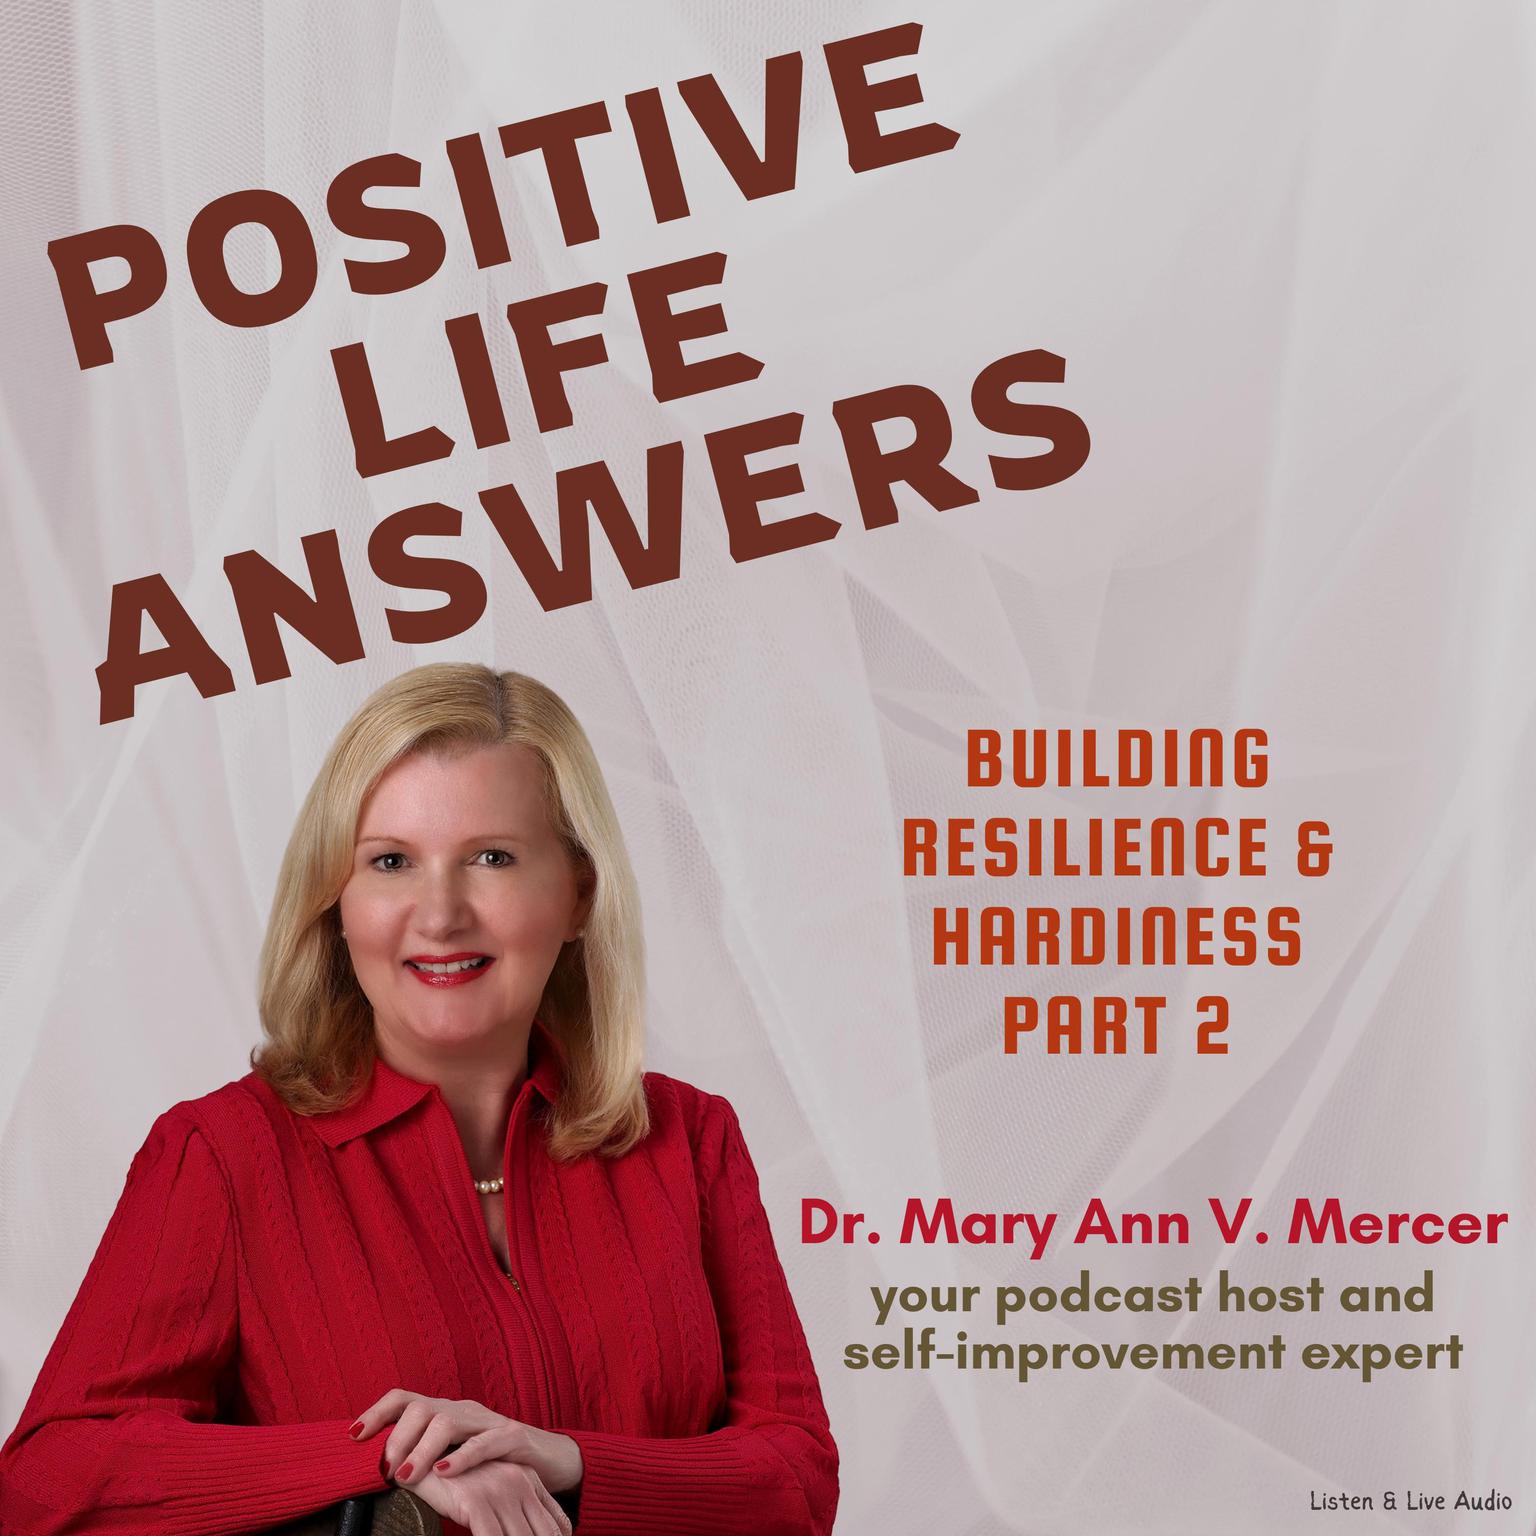 Positive Life Answers: Building Resilience & Hardiness - Part 2 Audiobook, by Mary Ann Mercer